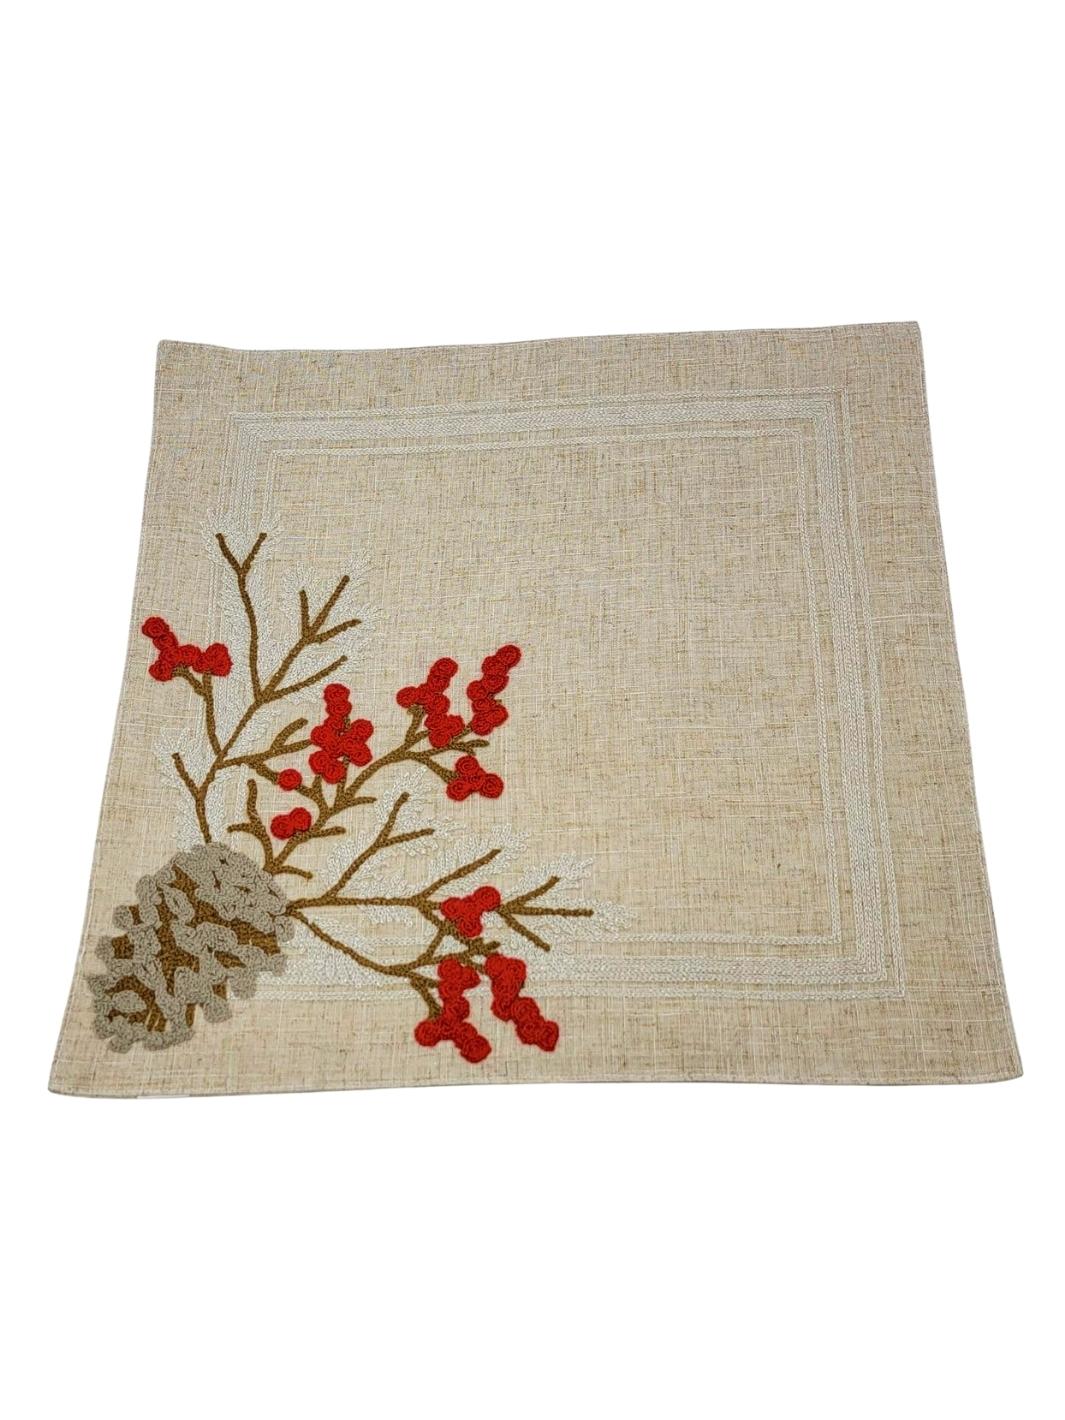 The Pine Berry Placemat